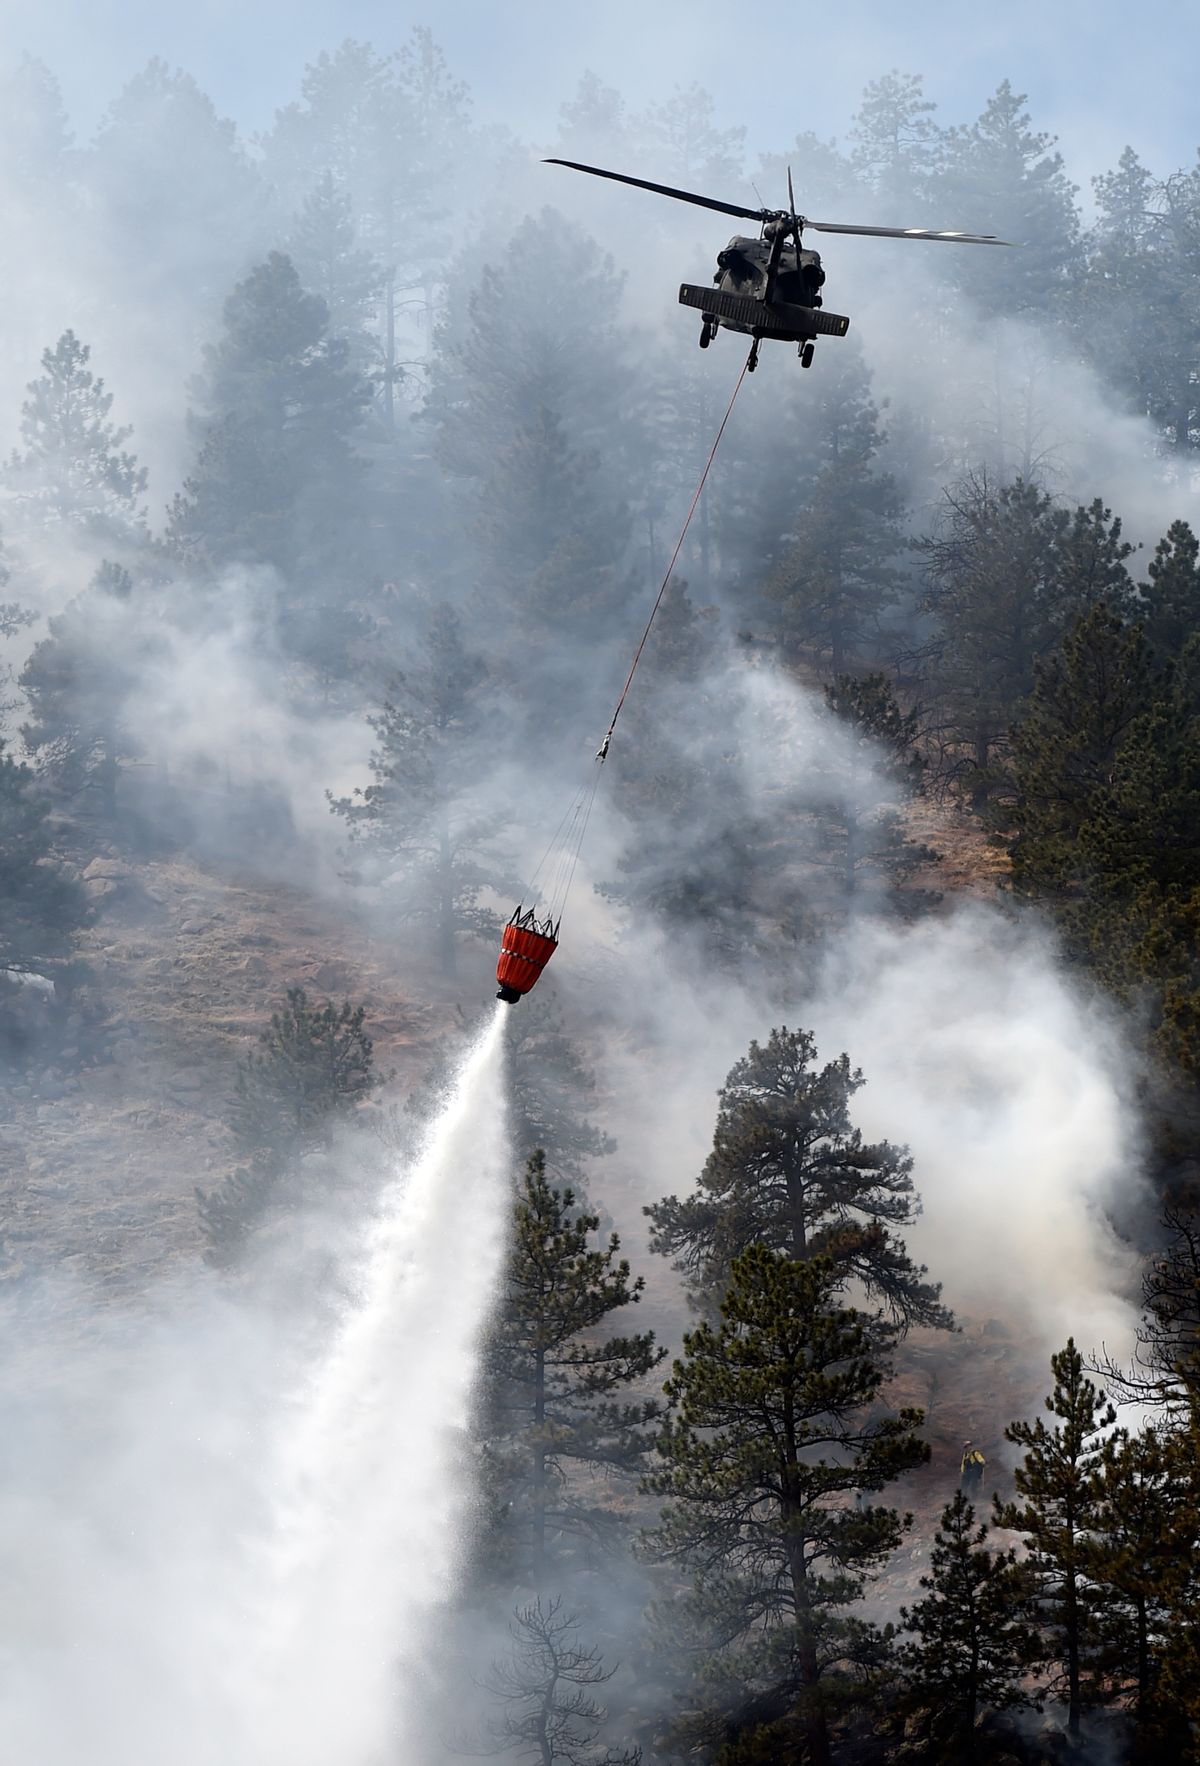 A helicopter drops water on the fire as crews battle the Sunshine Fire in the Sunshine canyon area of Boulder, Colo. on Sunday, March 19, 2017.  (Jeremy Papasso/Daily Camera via AP) (AP)